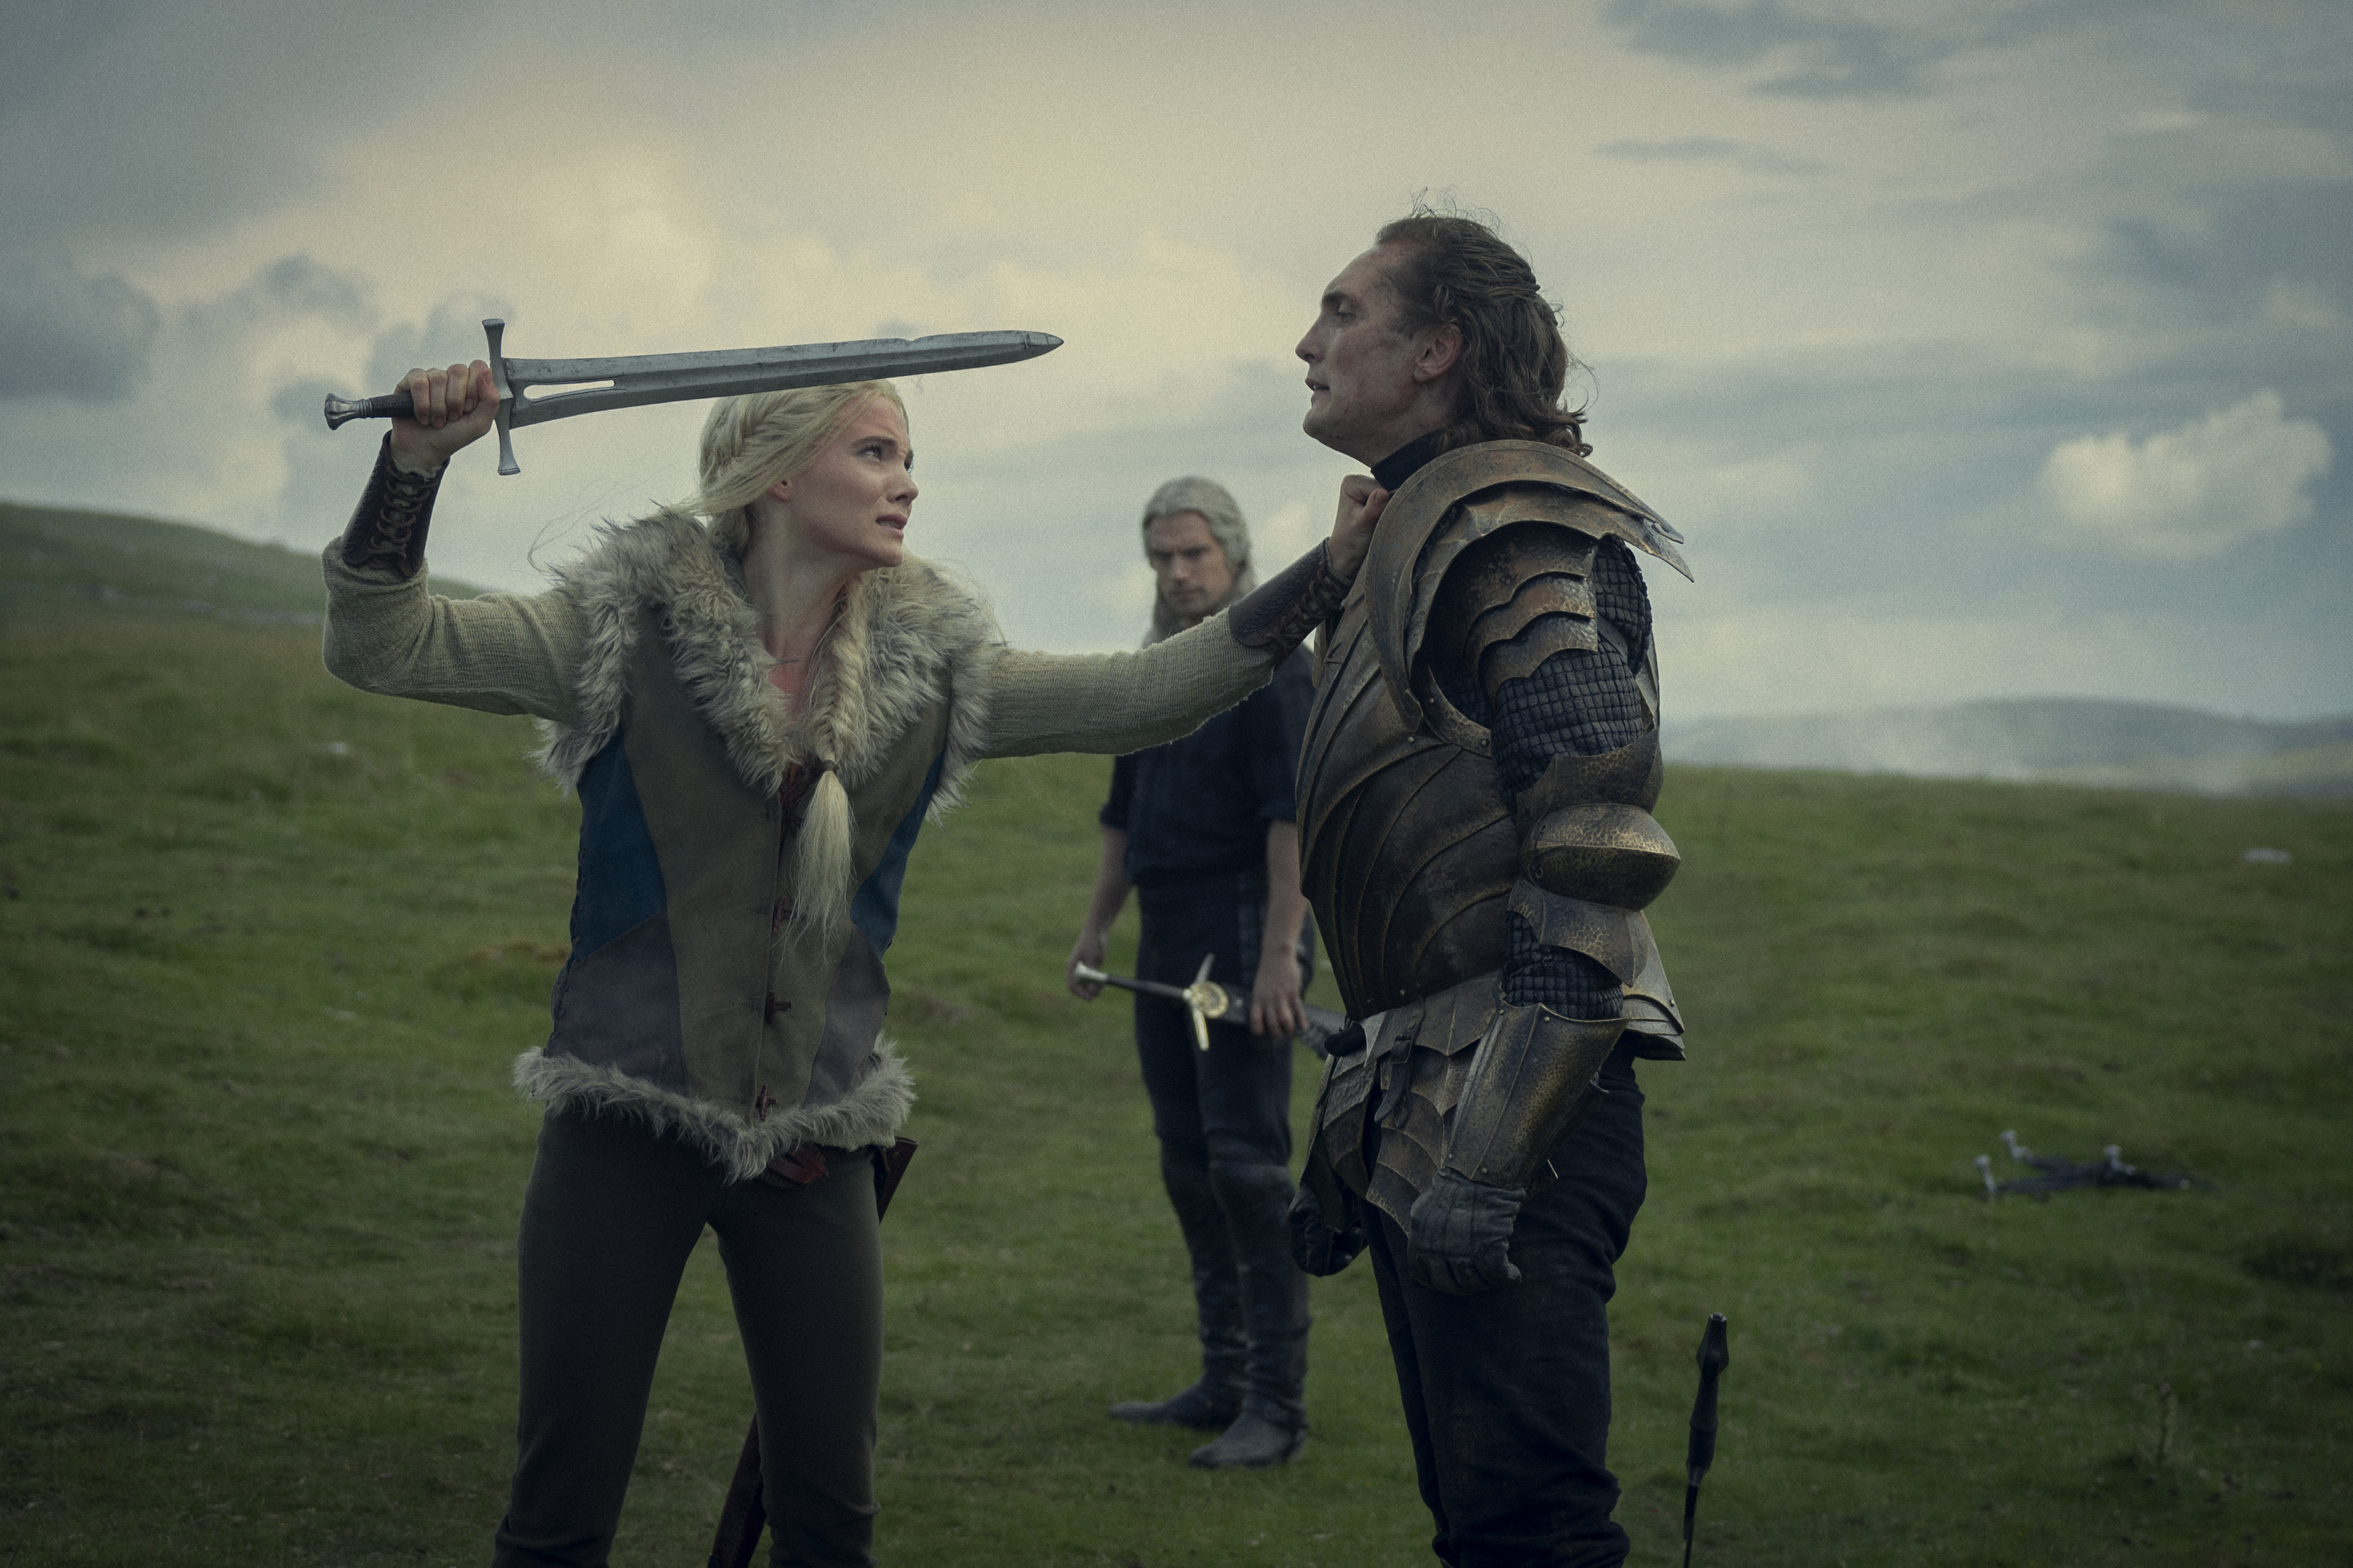 Ciri (Freya Allan) holding a sword up to Cahir (Eamon Farren) and holding him by the throat, while Geralt (Henry Cavill) looks on in the background